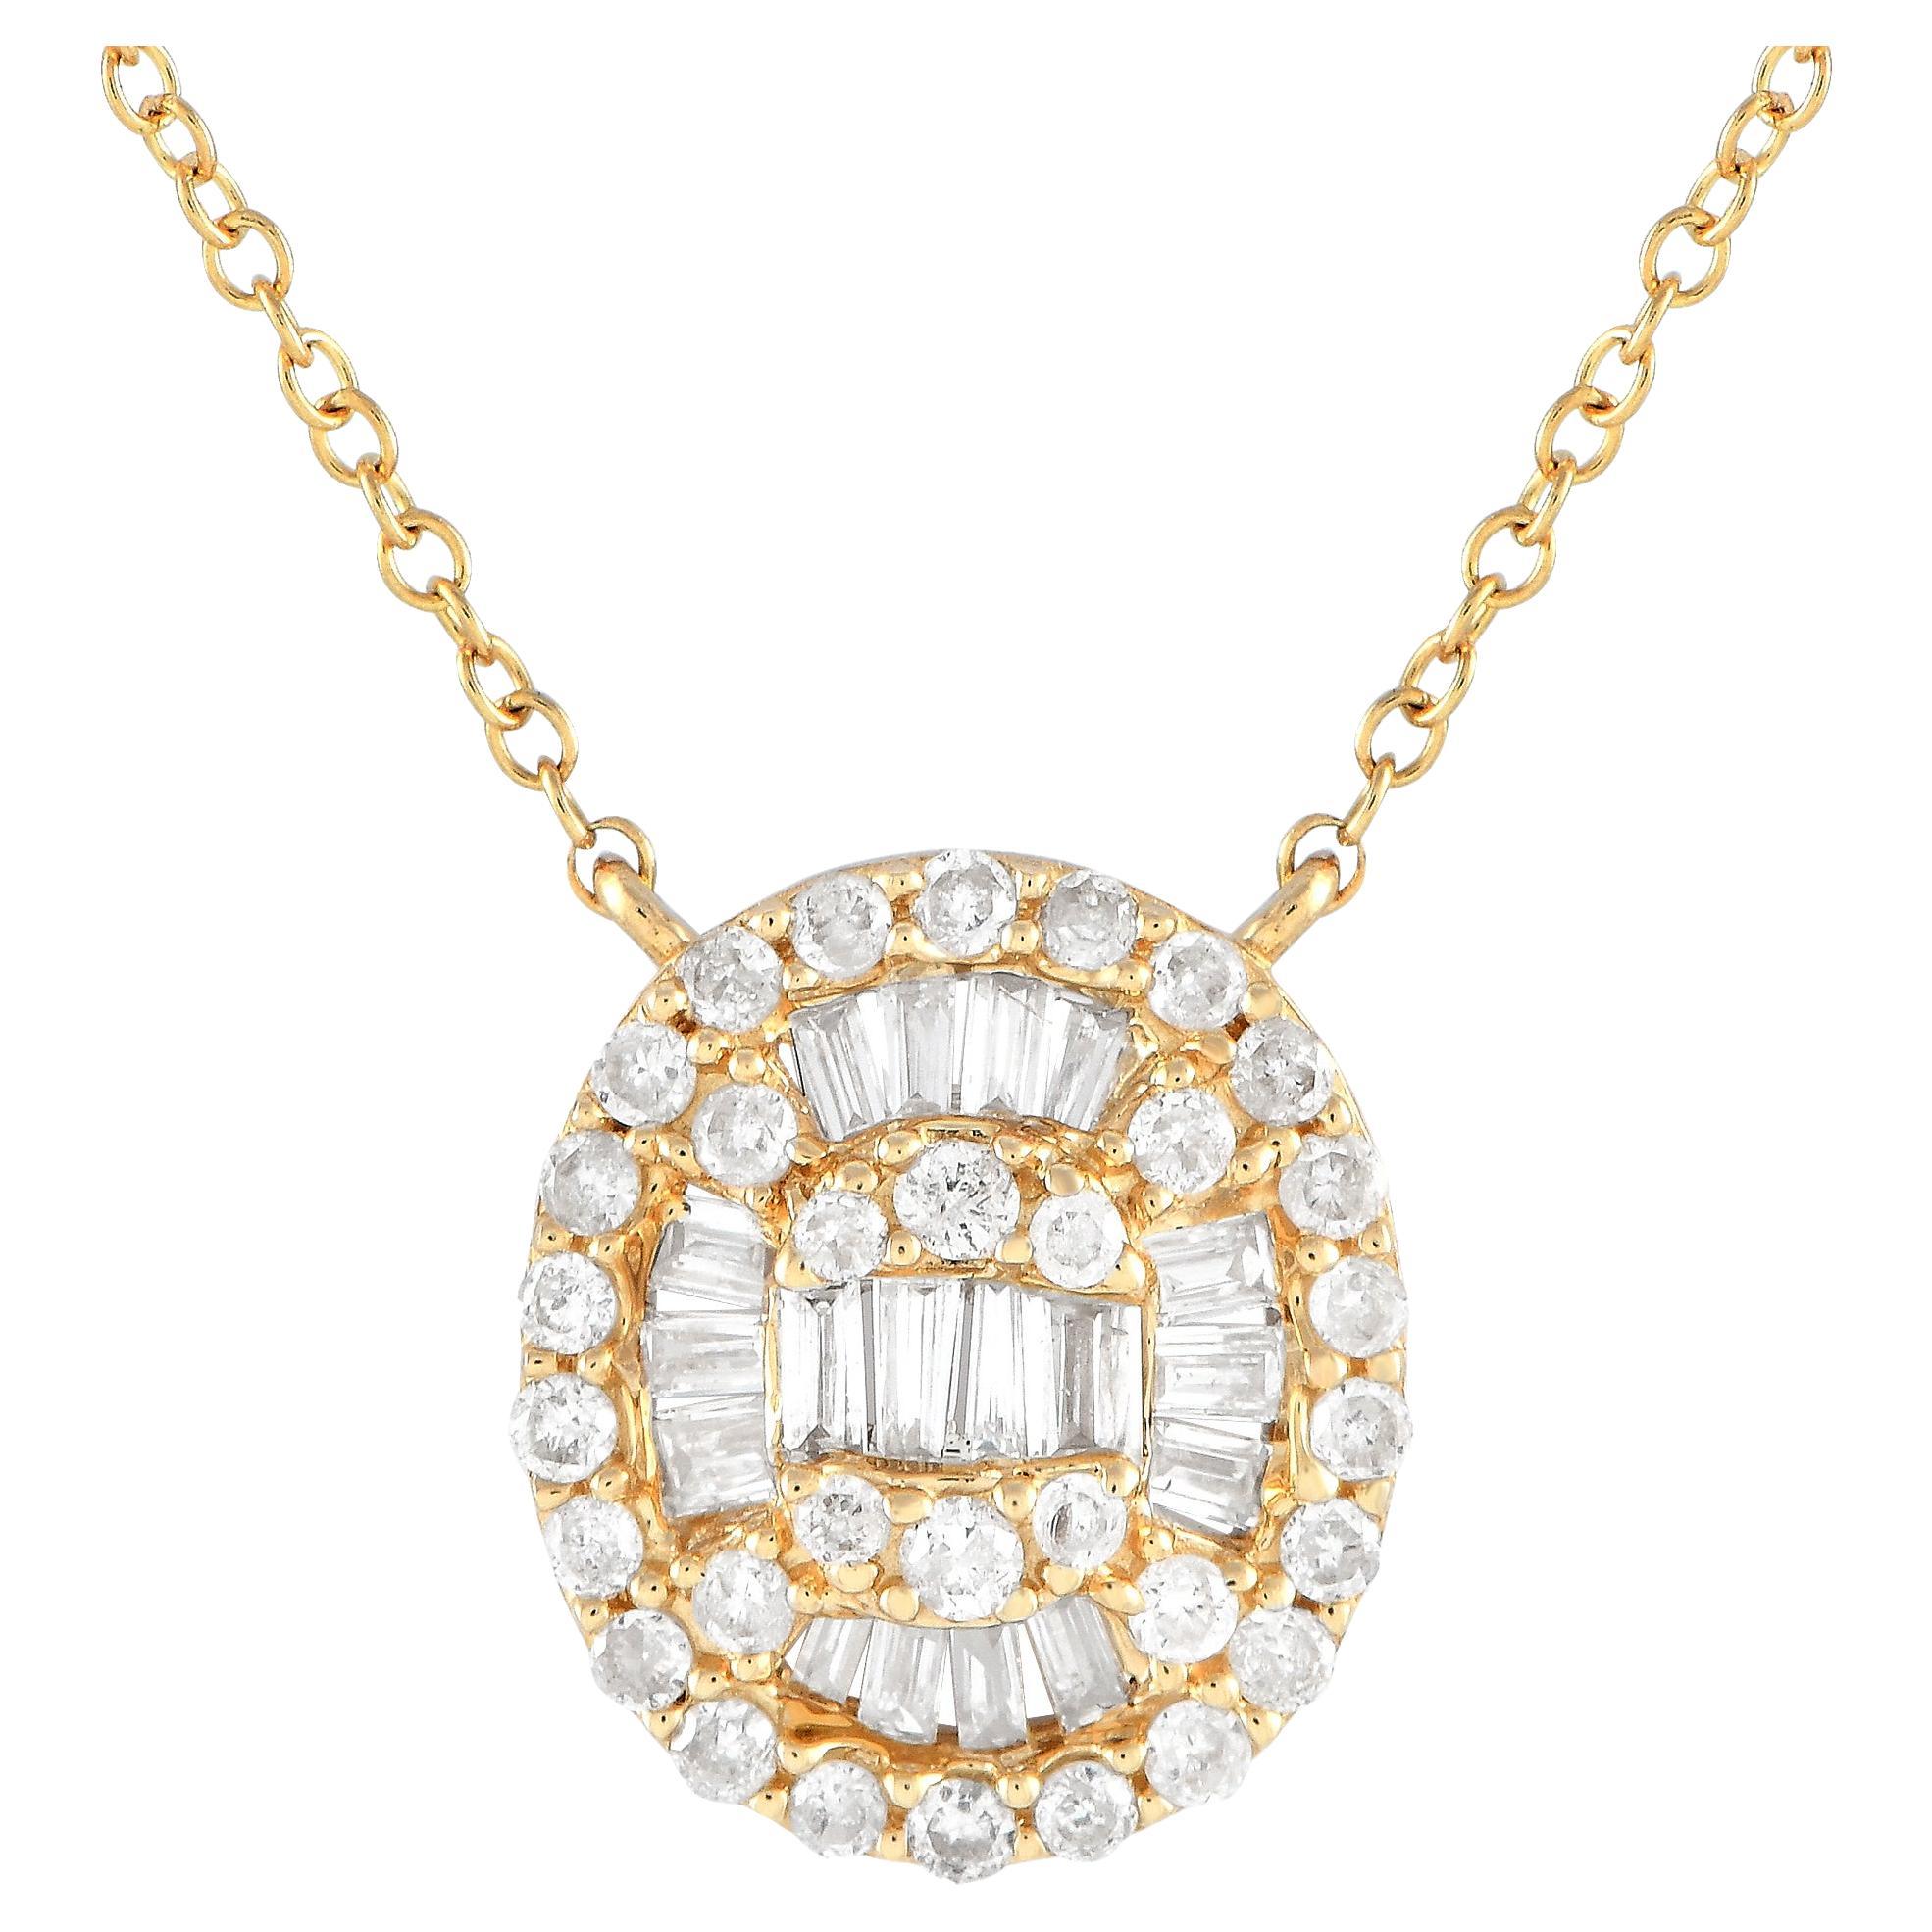 LB Exclusive 14K Yellow Gold 0.31ct Diamond Cluster Necklace PN14719